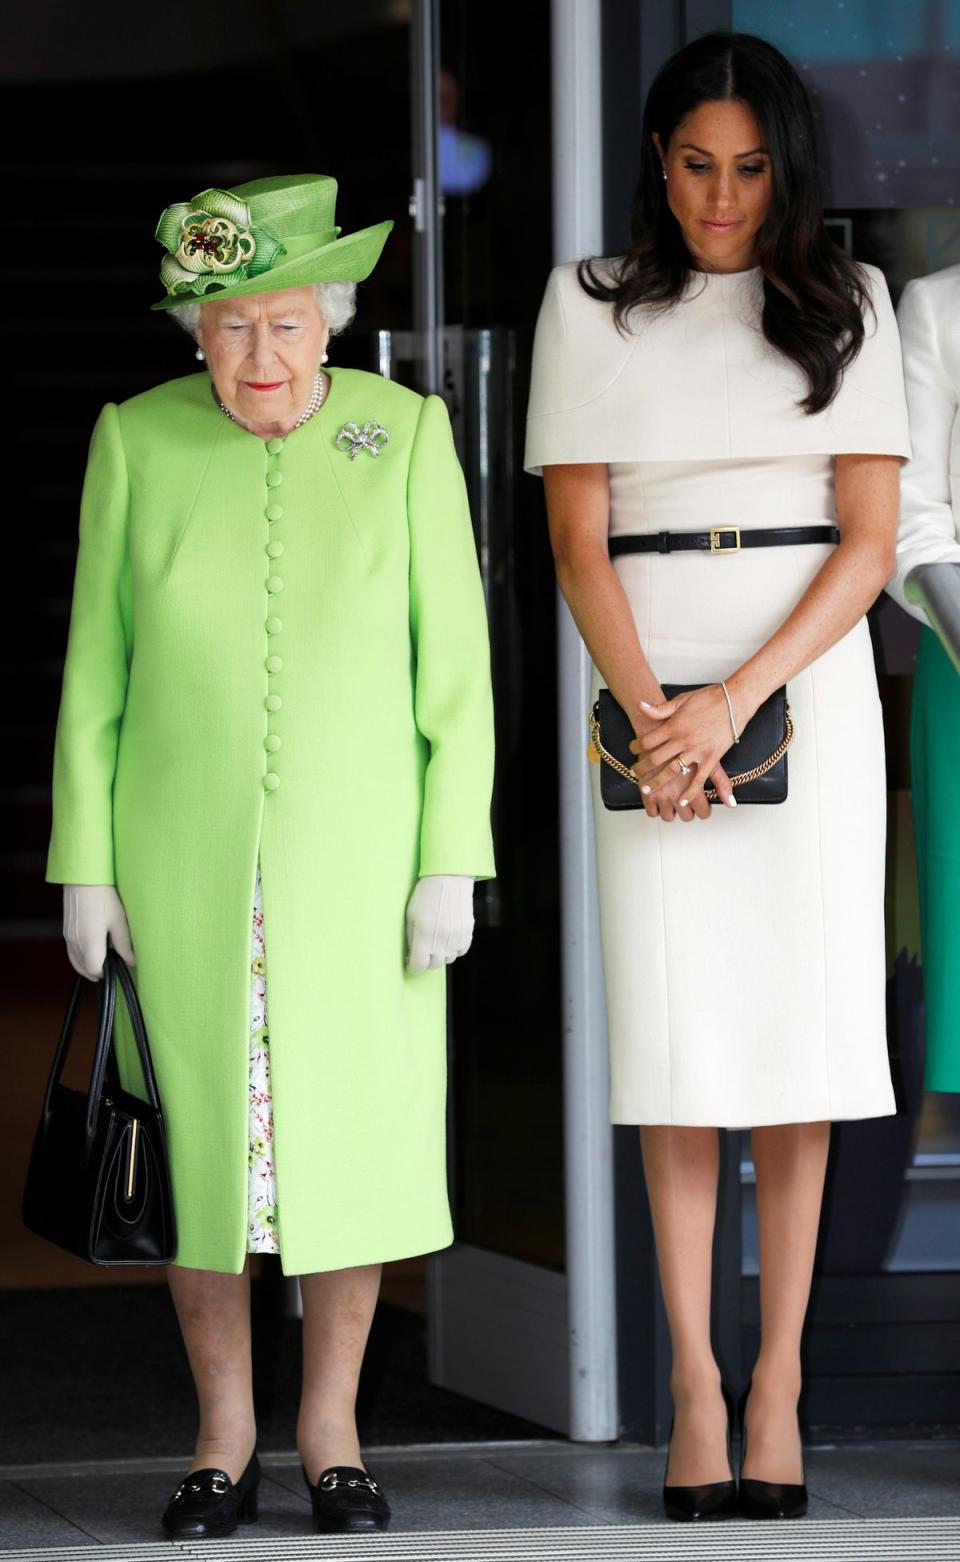 Meghan attended the event with the Queen. (Getty Images)